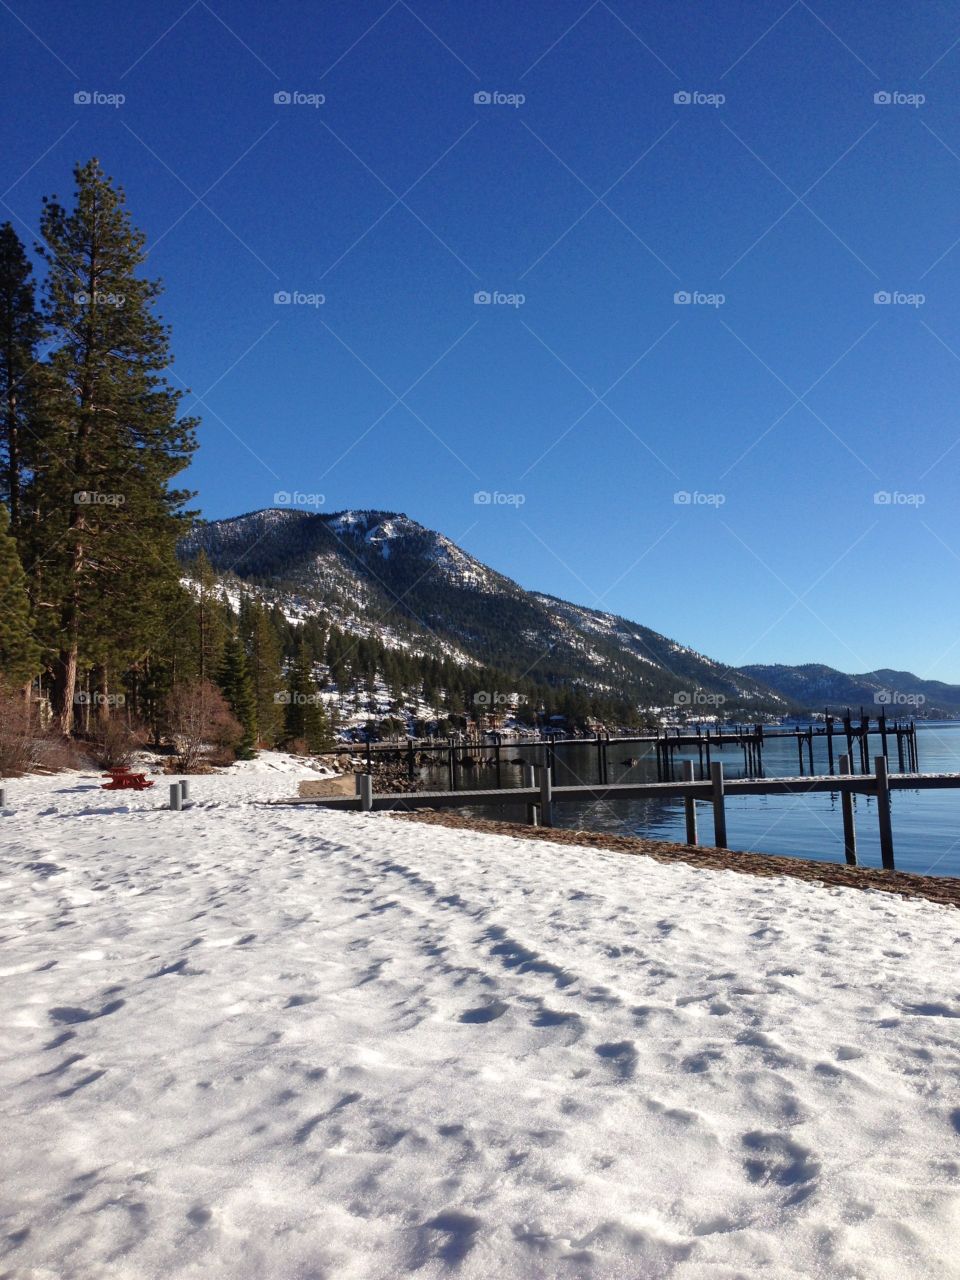 Warm winter day at the beach in Lake Tahoe.